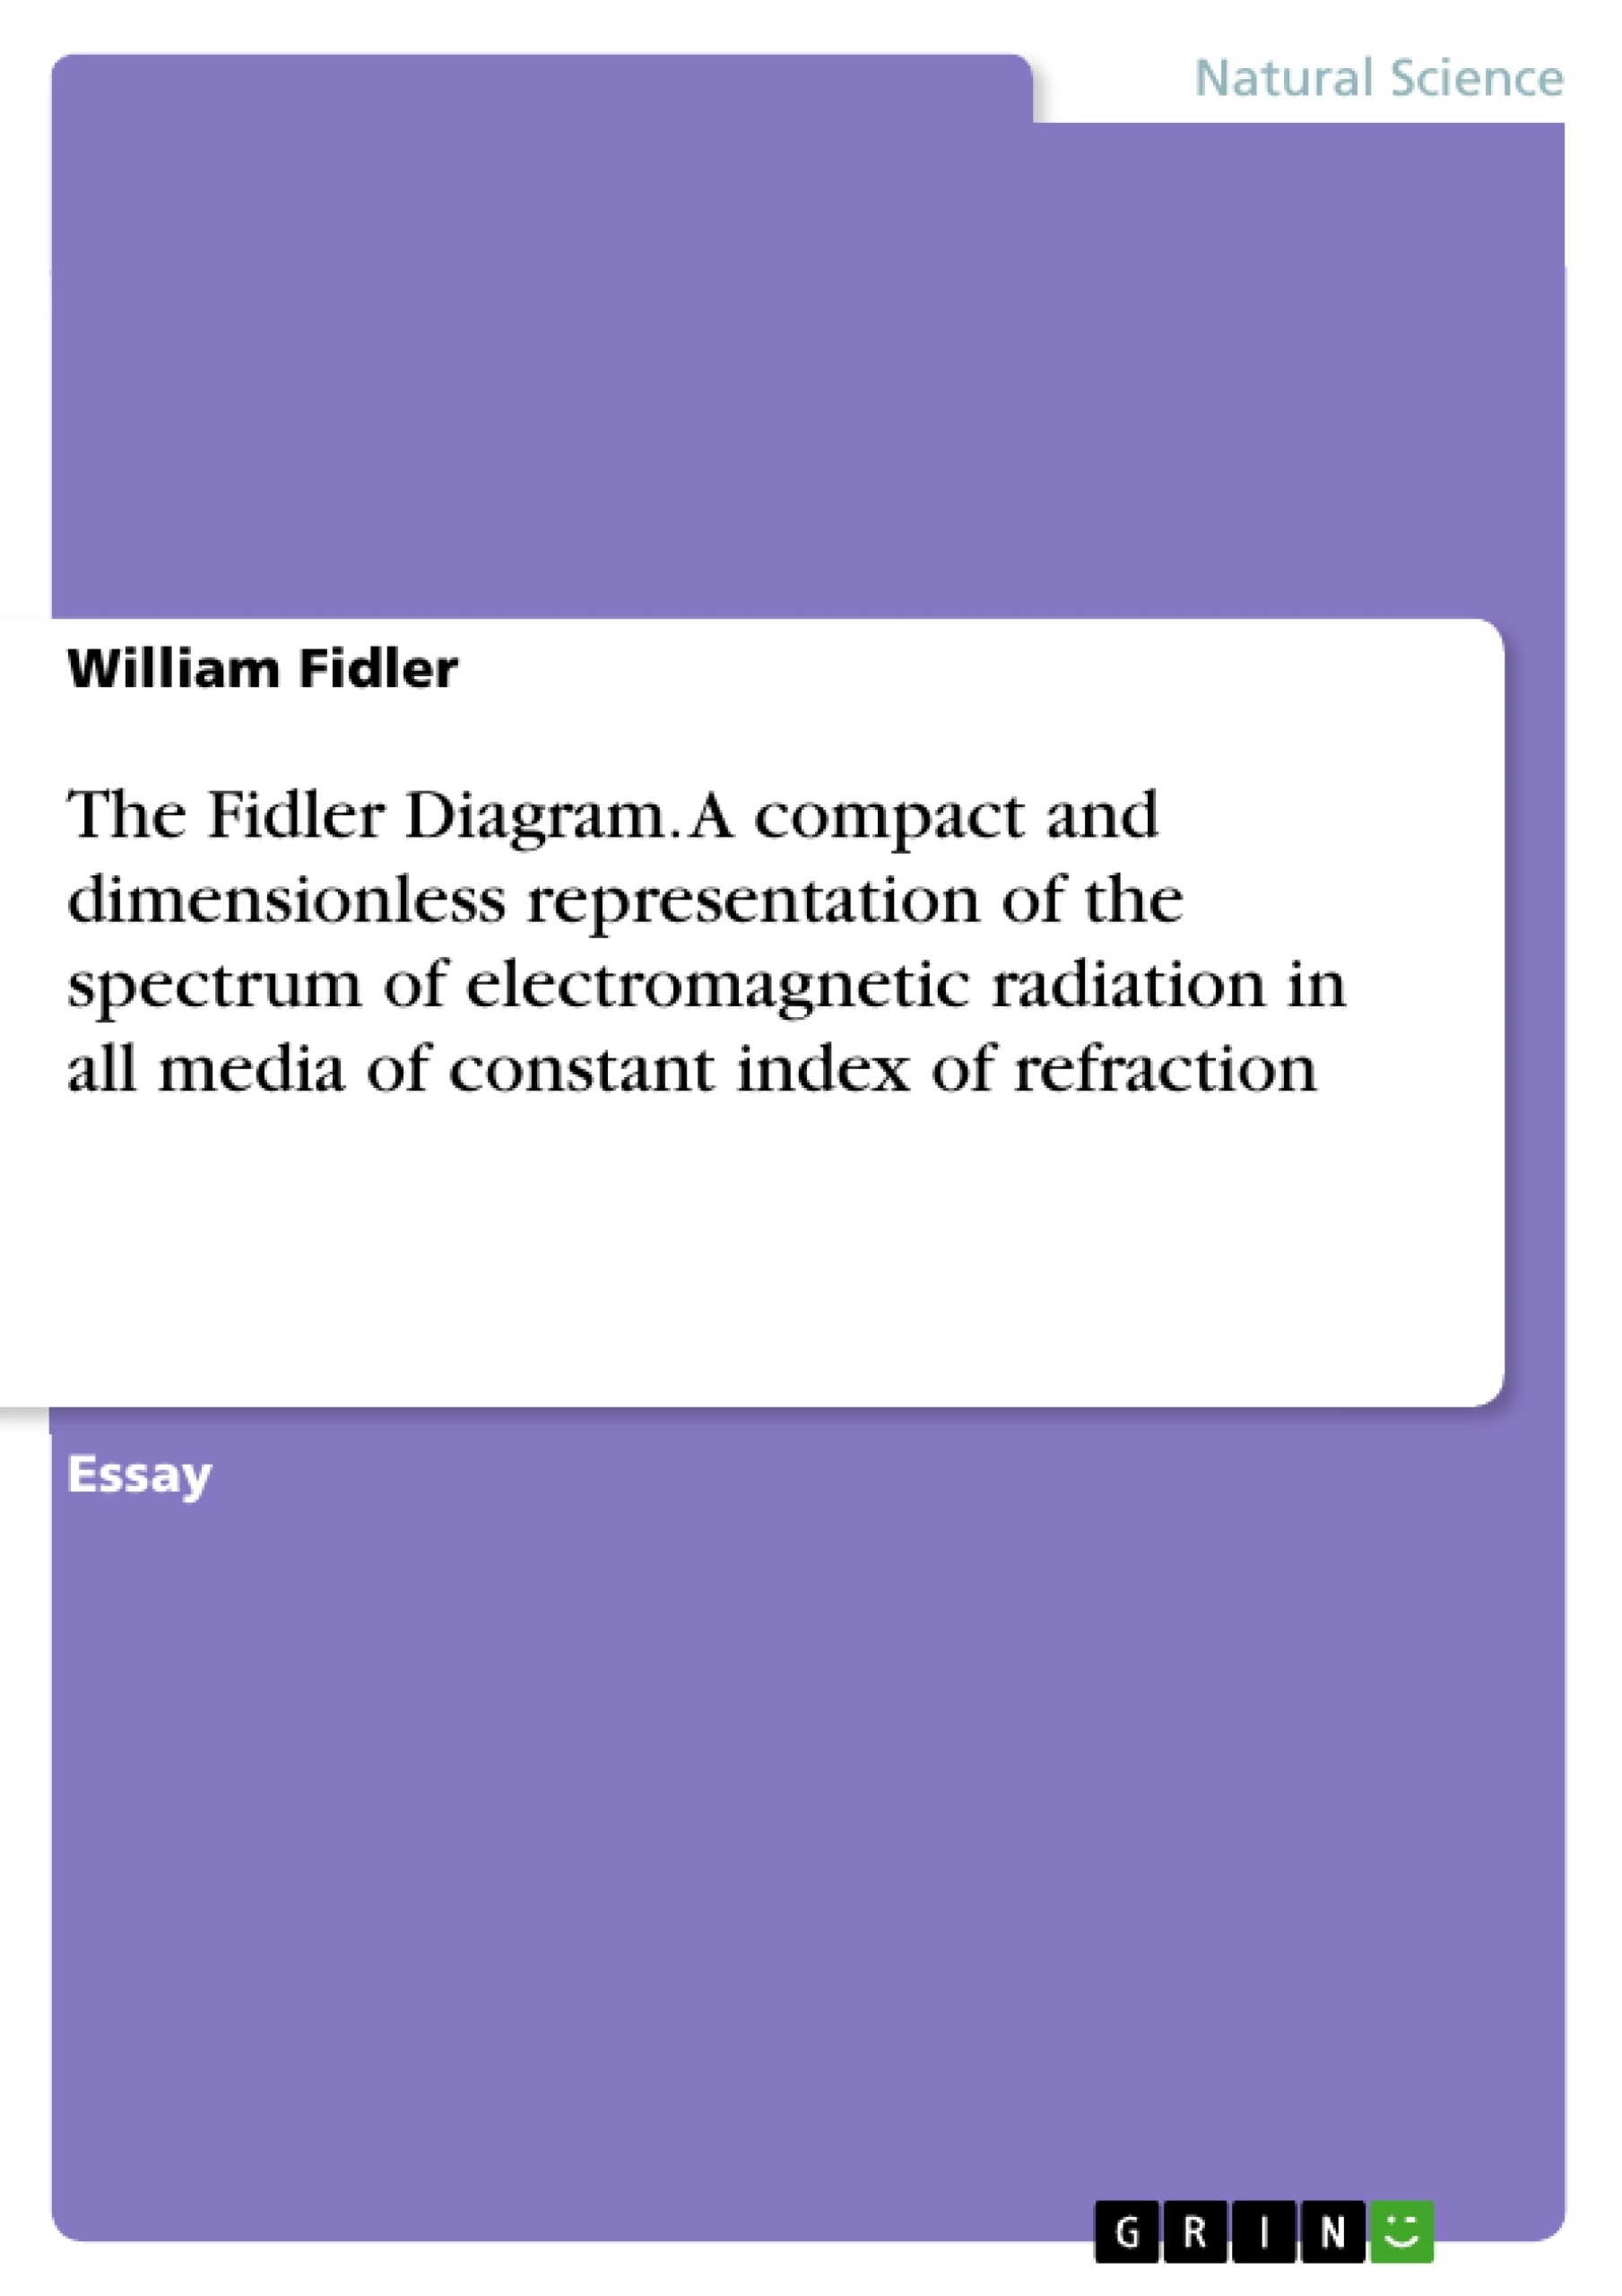 Titel: The Fidler Diagram. A compact and dimensionless representation of the spectrum of electromagnetic radiation in all media of constant index of refraction